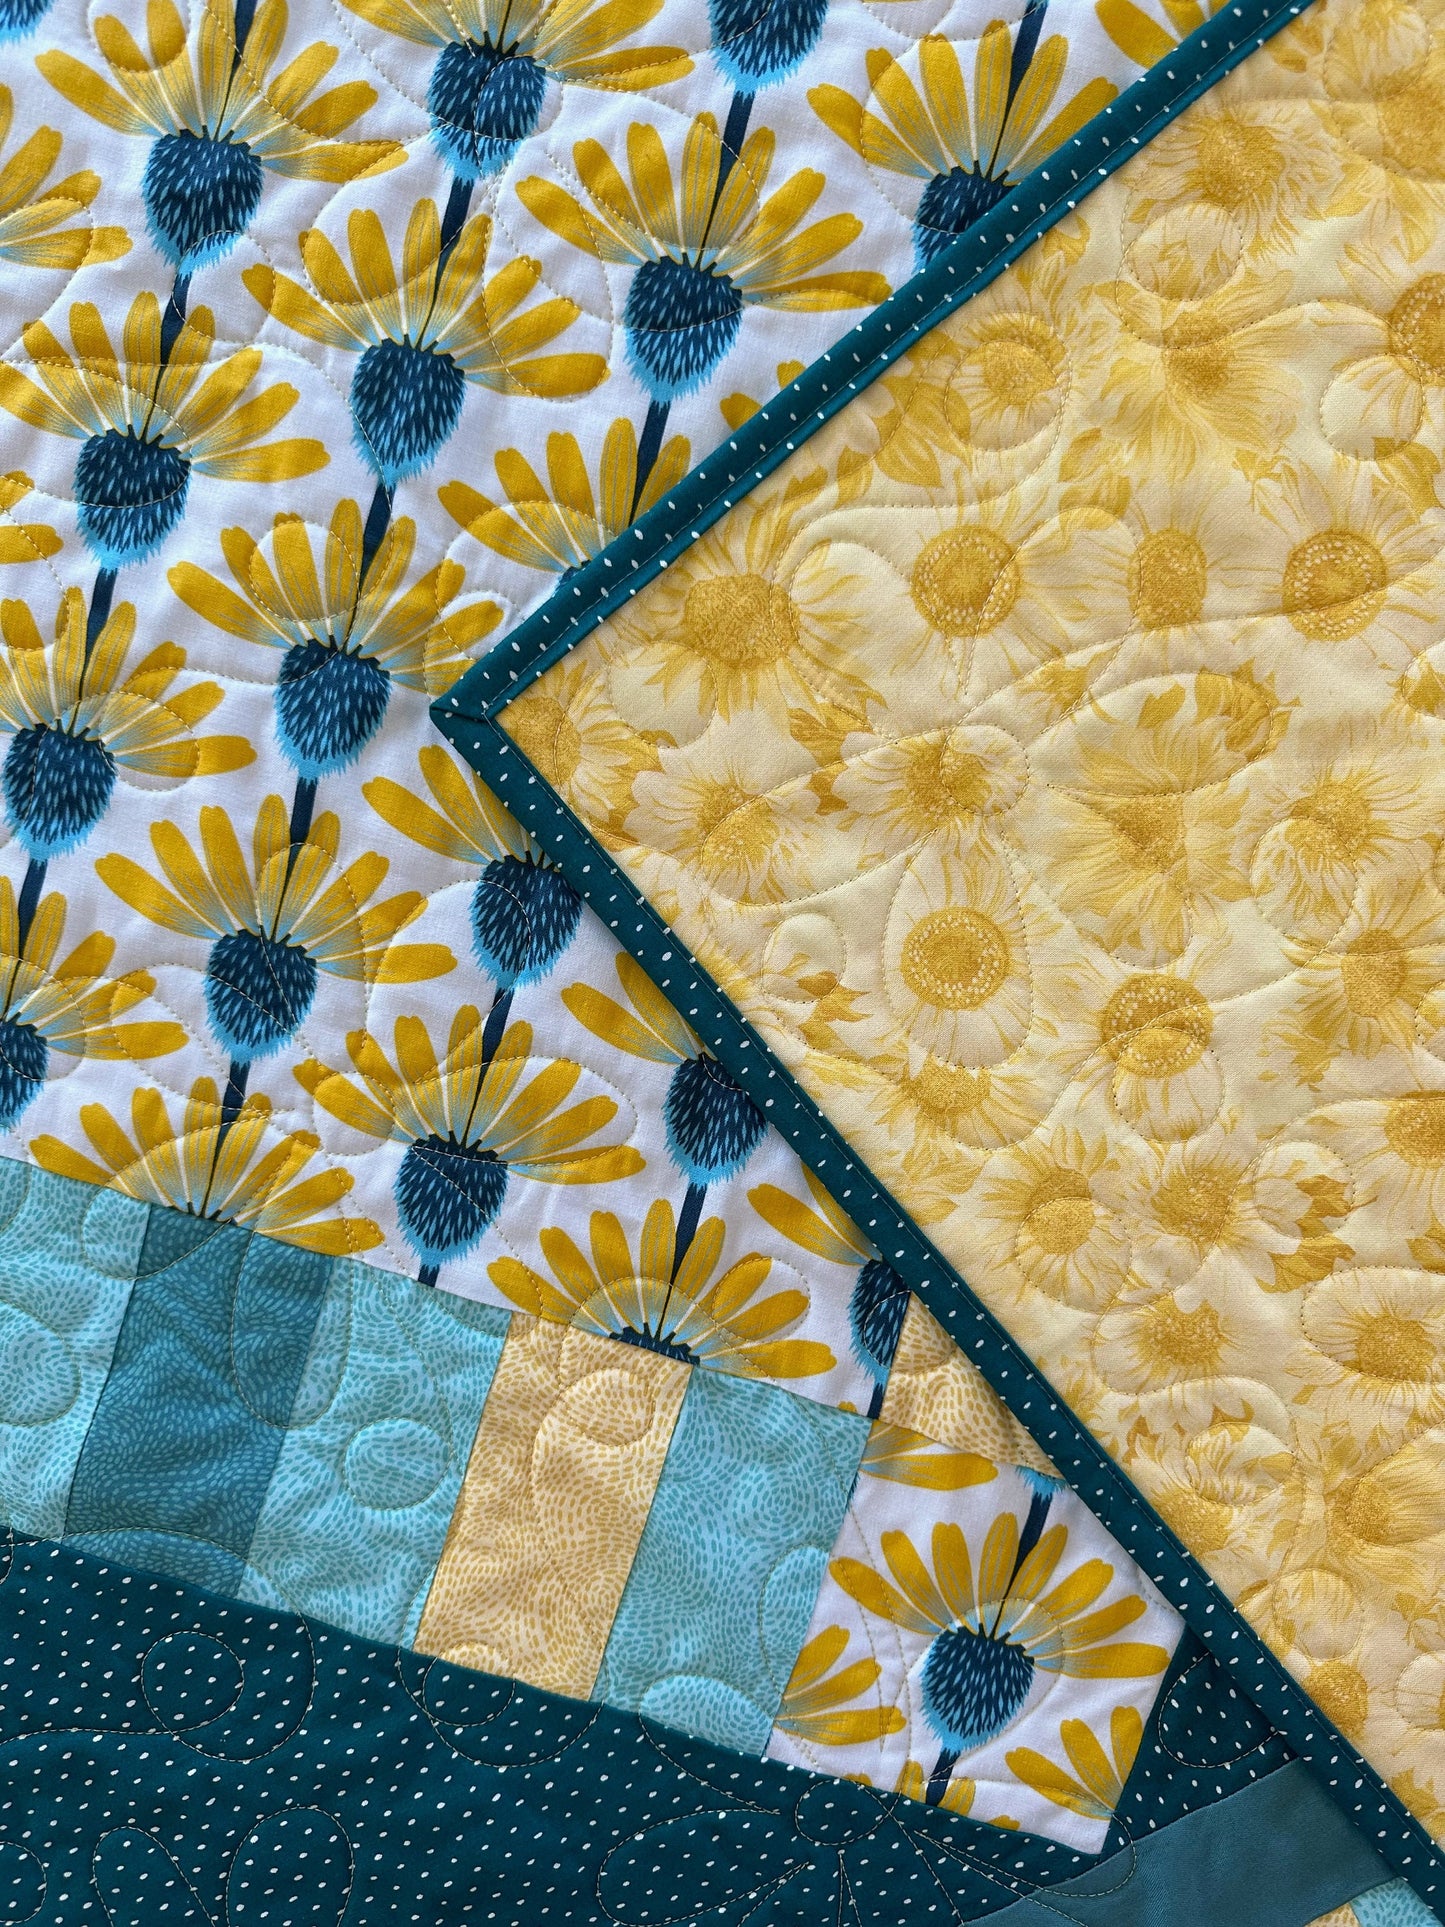 Yellow Echinacea Flower With Teal Polka Dots, Lap Quilt